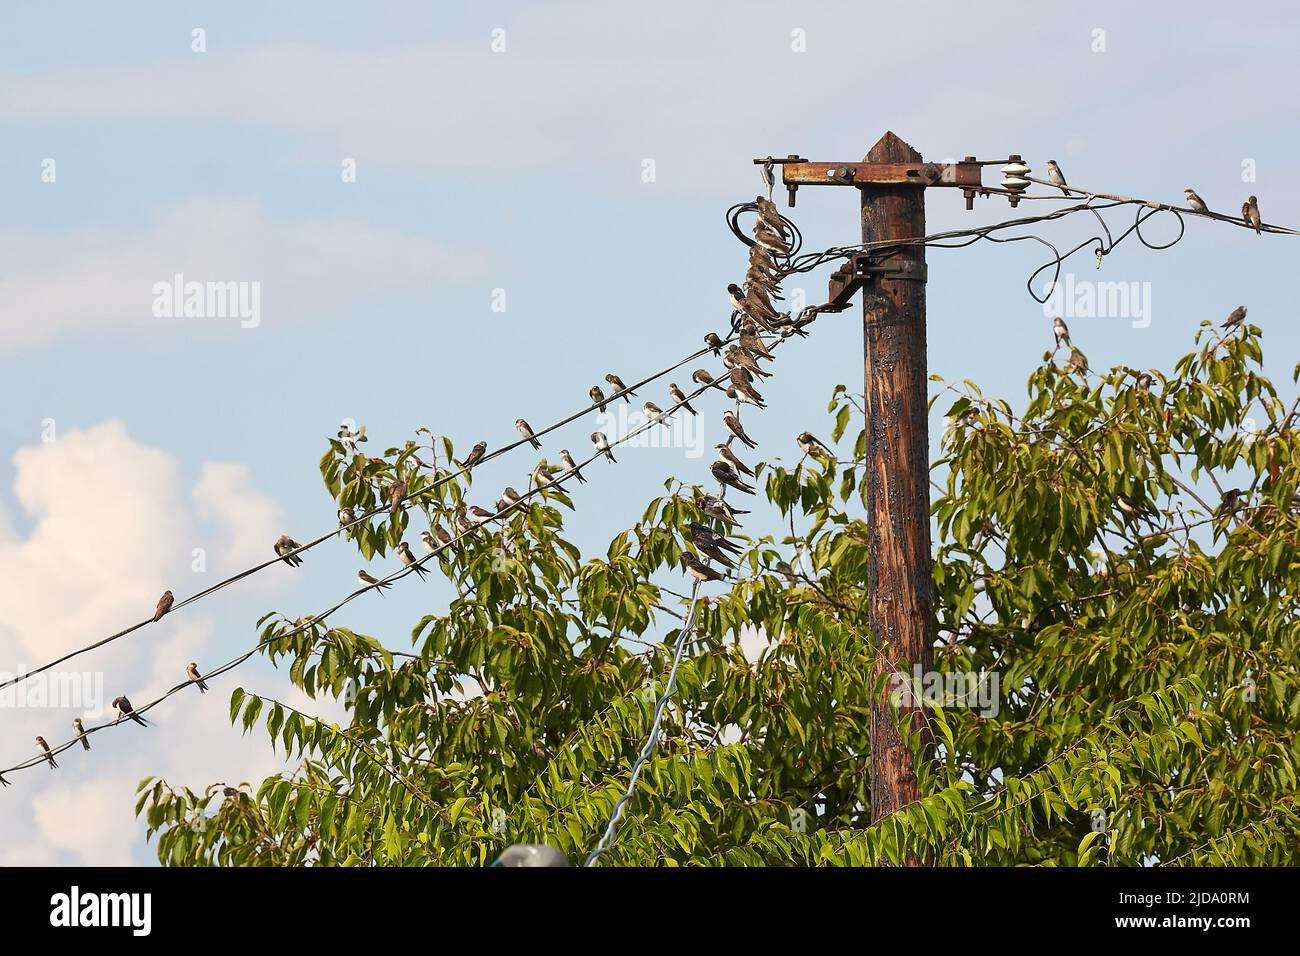 Swallows on the wires Stock Photo